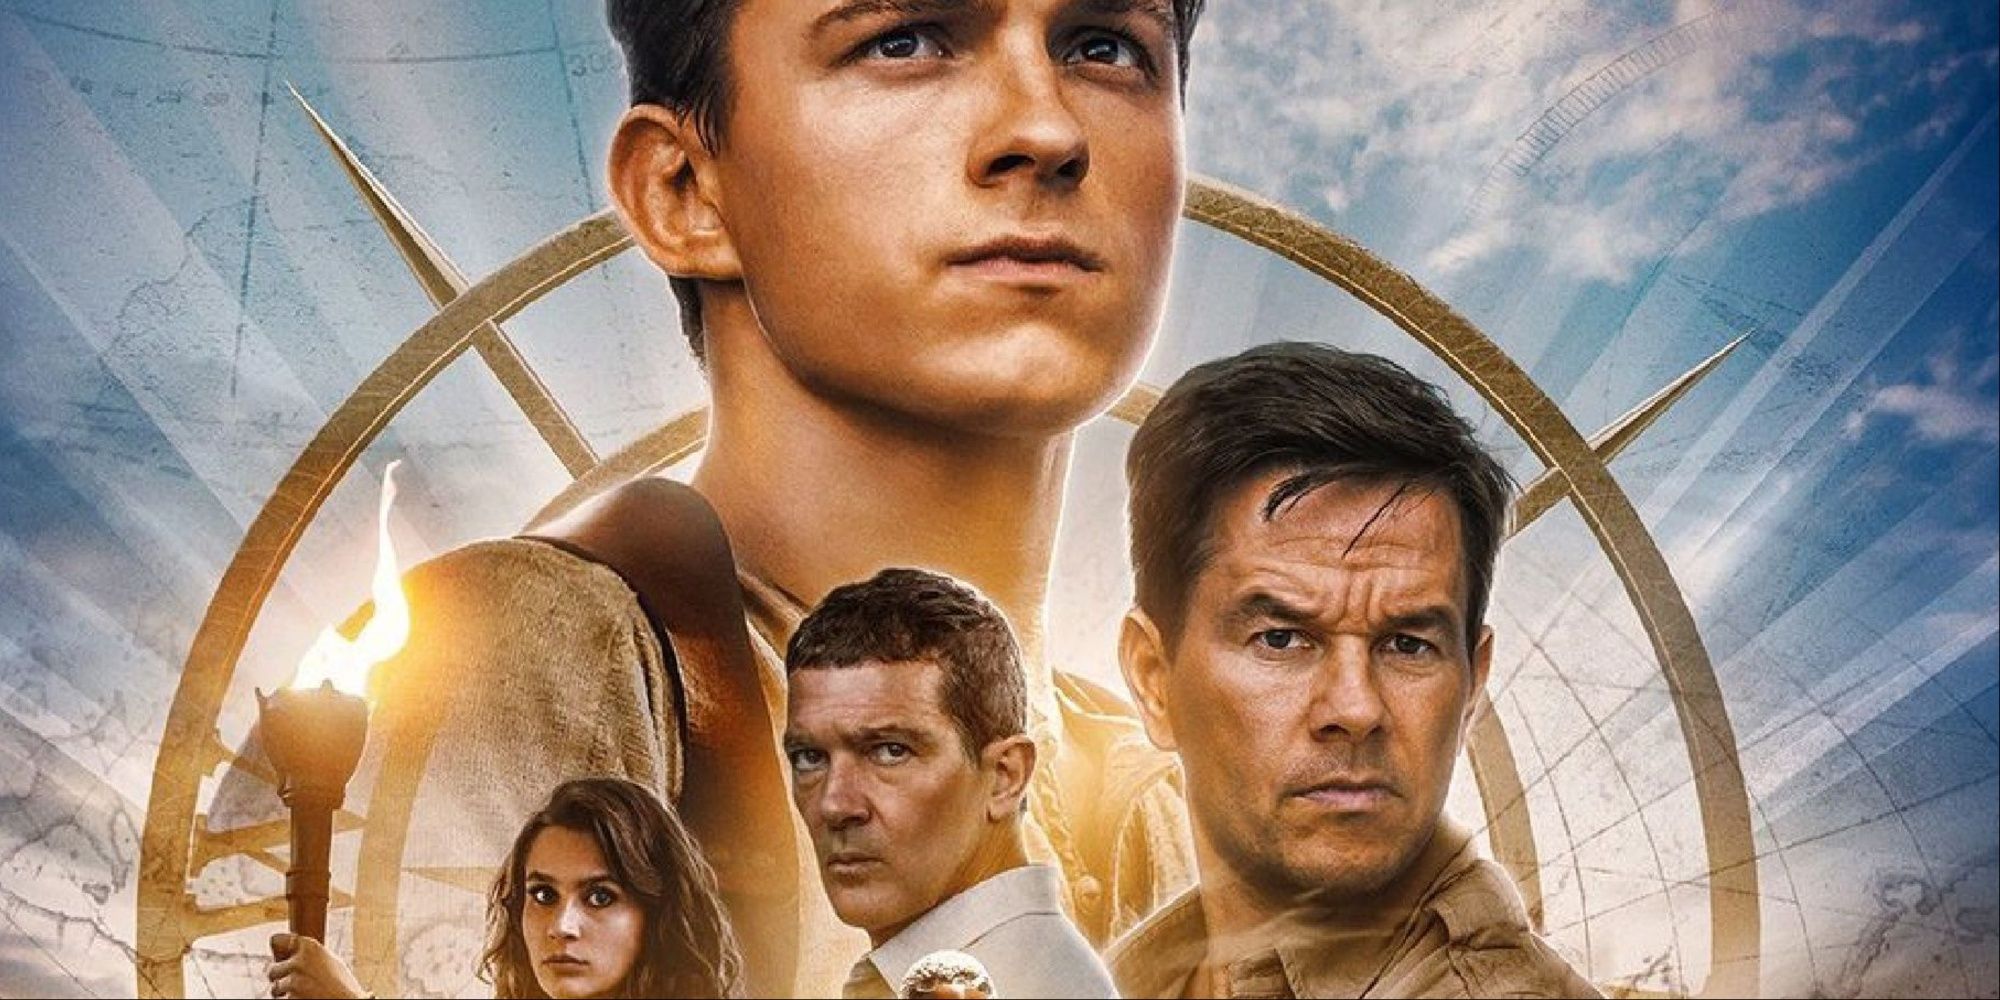 The movie poster for the Uncharted movie with Tom Holland's Nate, Wahlberg's sully, Antonio Banderas, and Sophia Ali's Chloe Frazer.